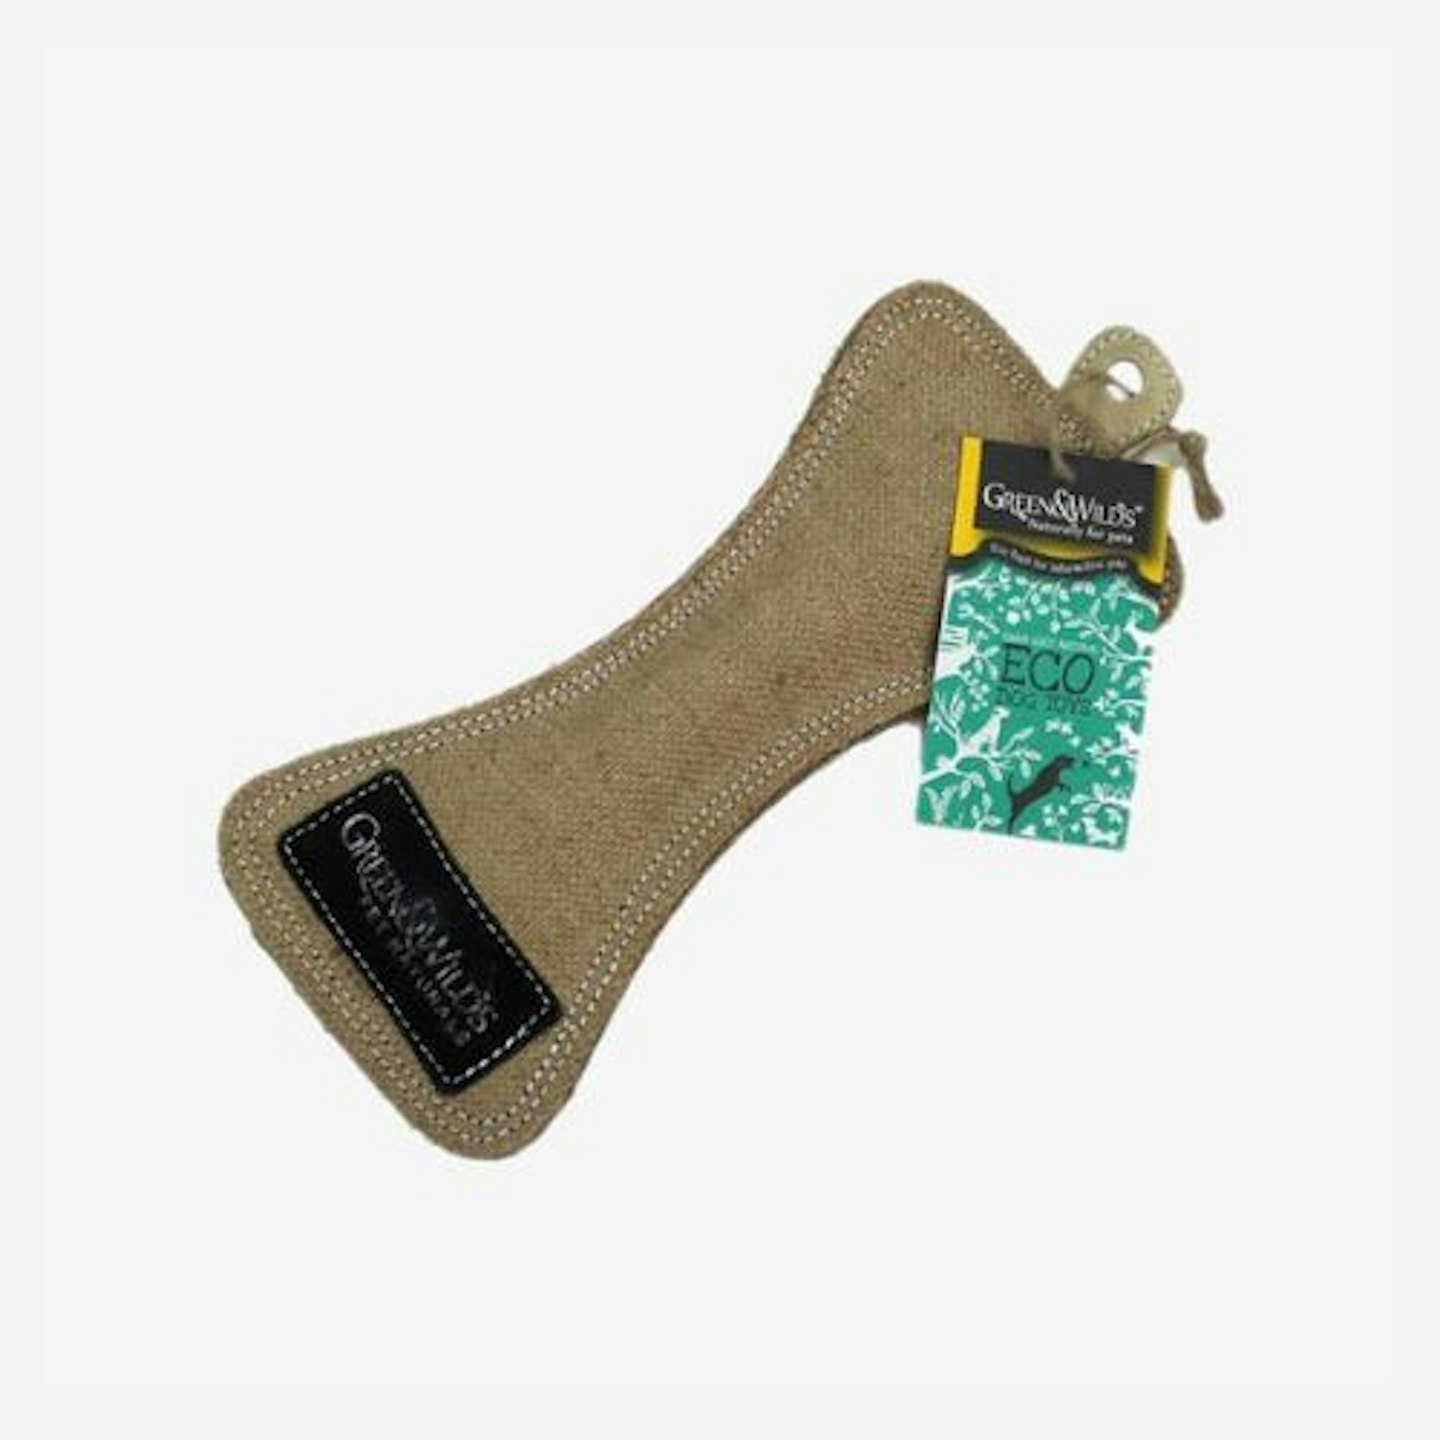 Funny Bone - Eco Dog Toy. Made From Sustainably Sourced Jute